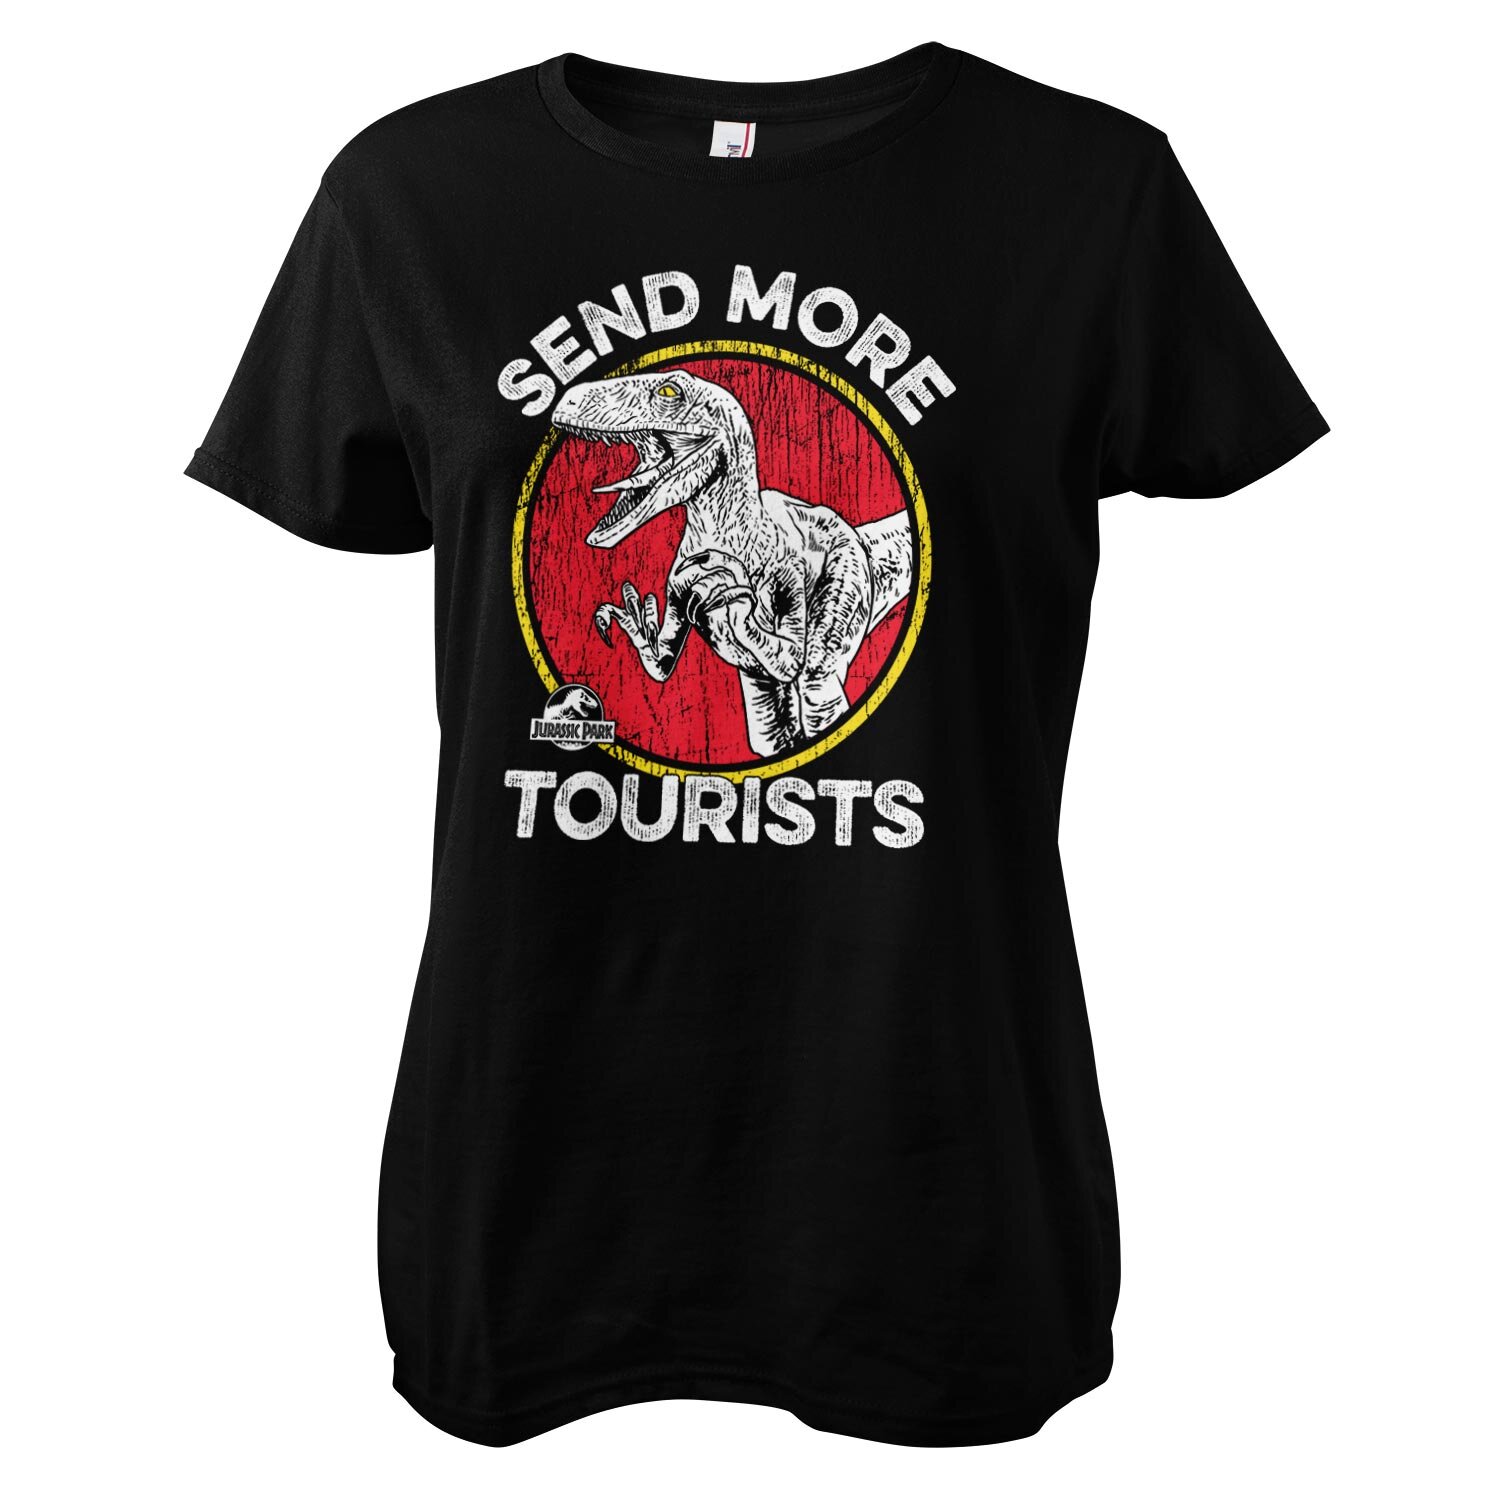 Jurassic Park - Send More Tourists Girly Tee